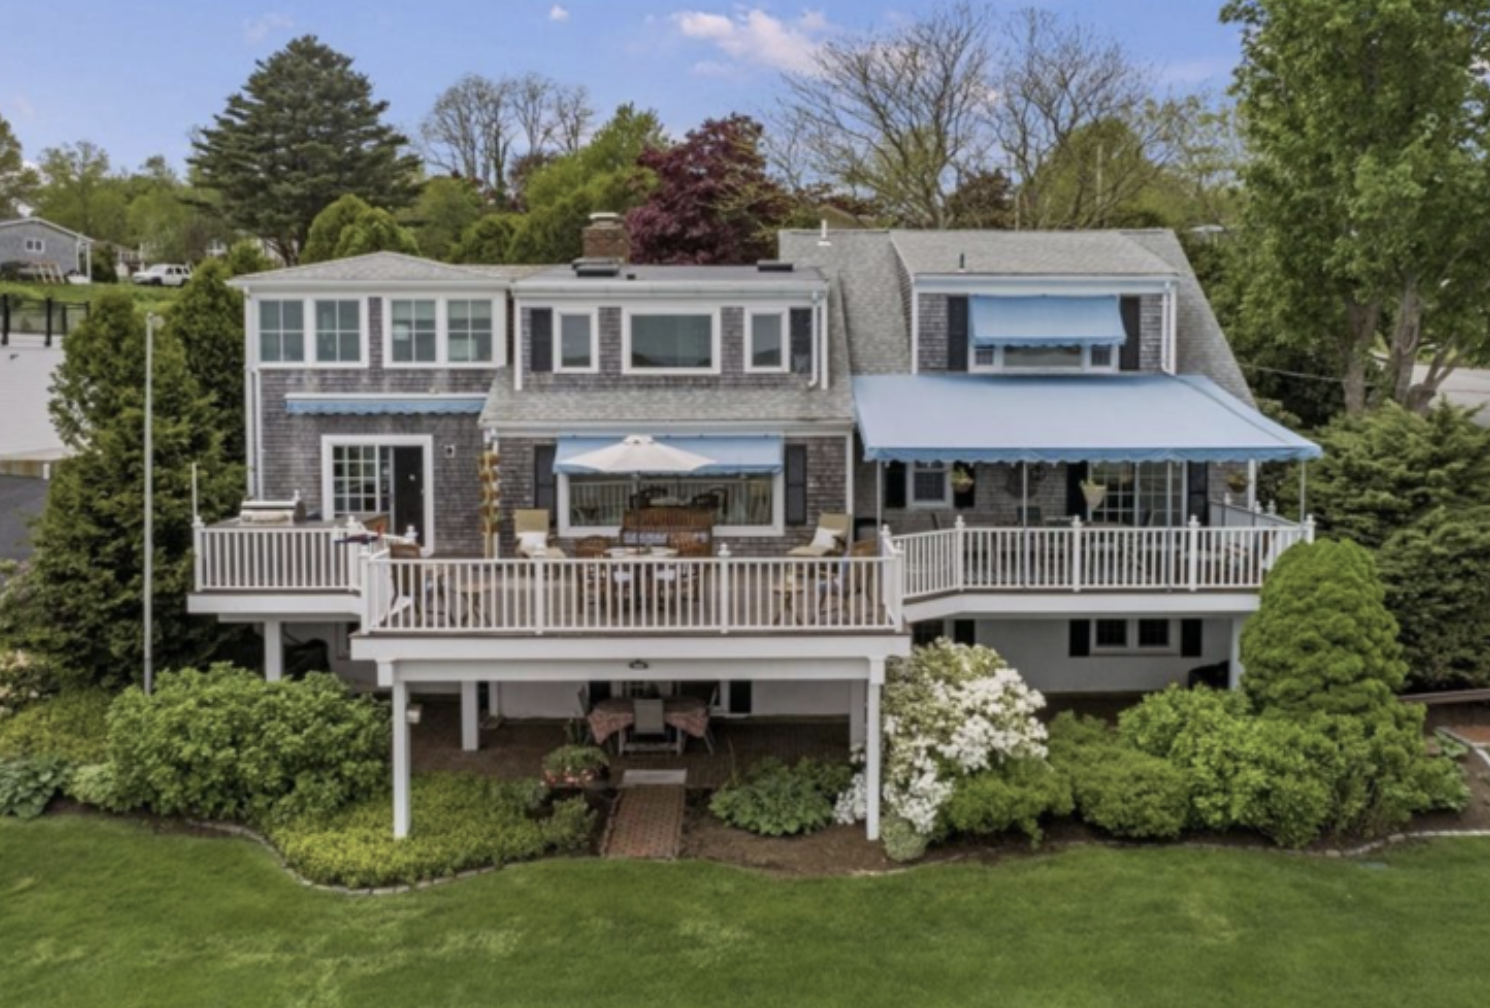 STUNNING COASTAL CUSTOM HOME IN PORTSMOUTH HITS THE MARKET FOR $1,500,000